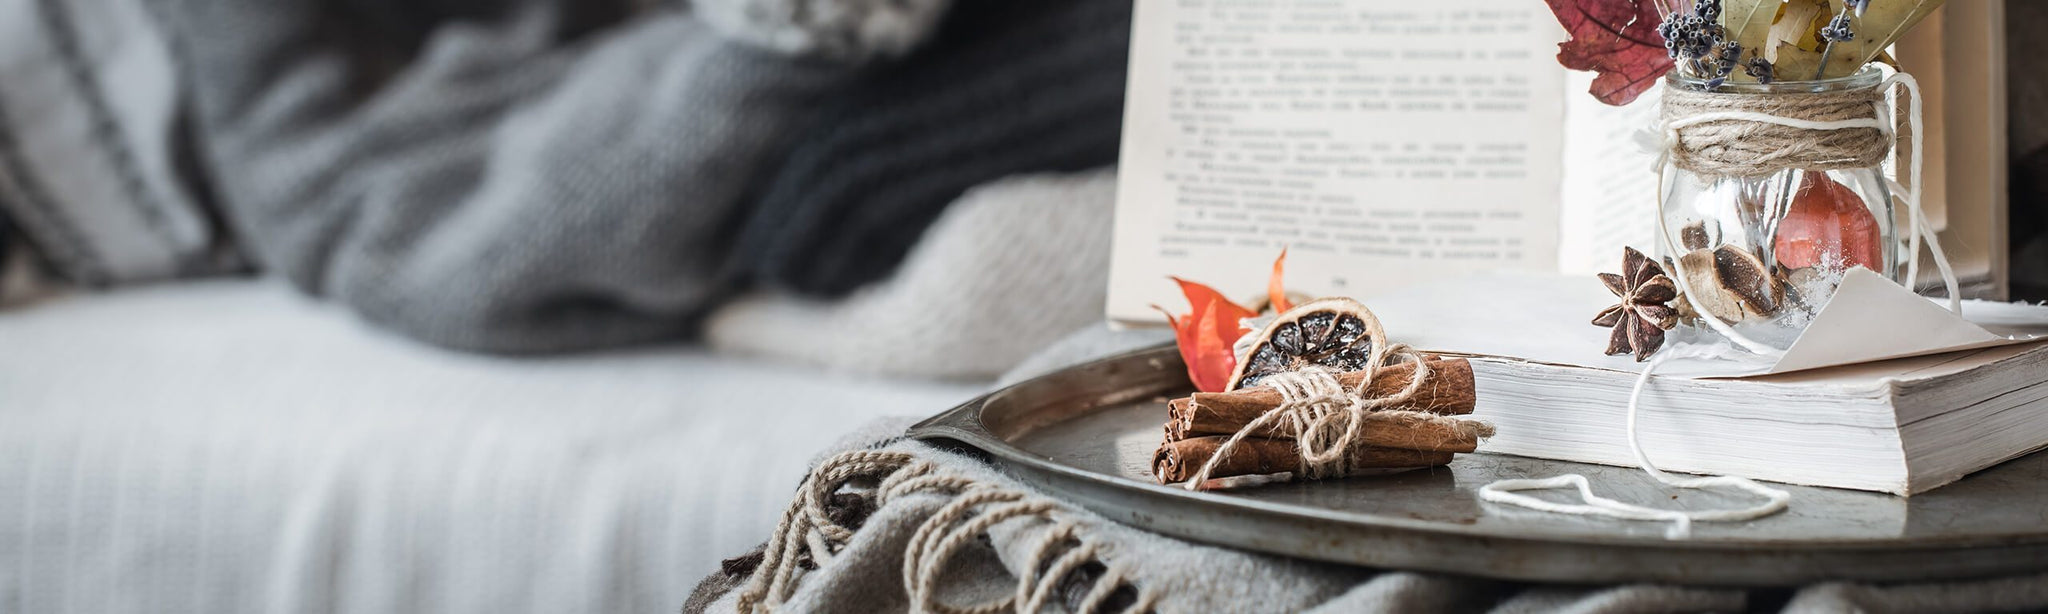 What can we learn from Hygge?